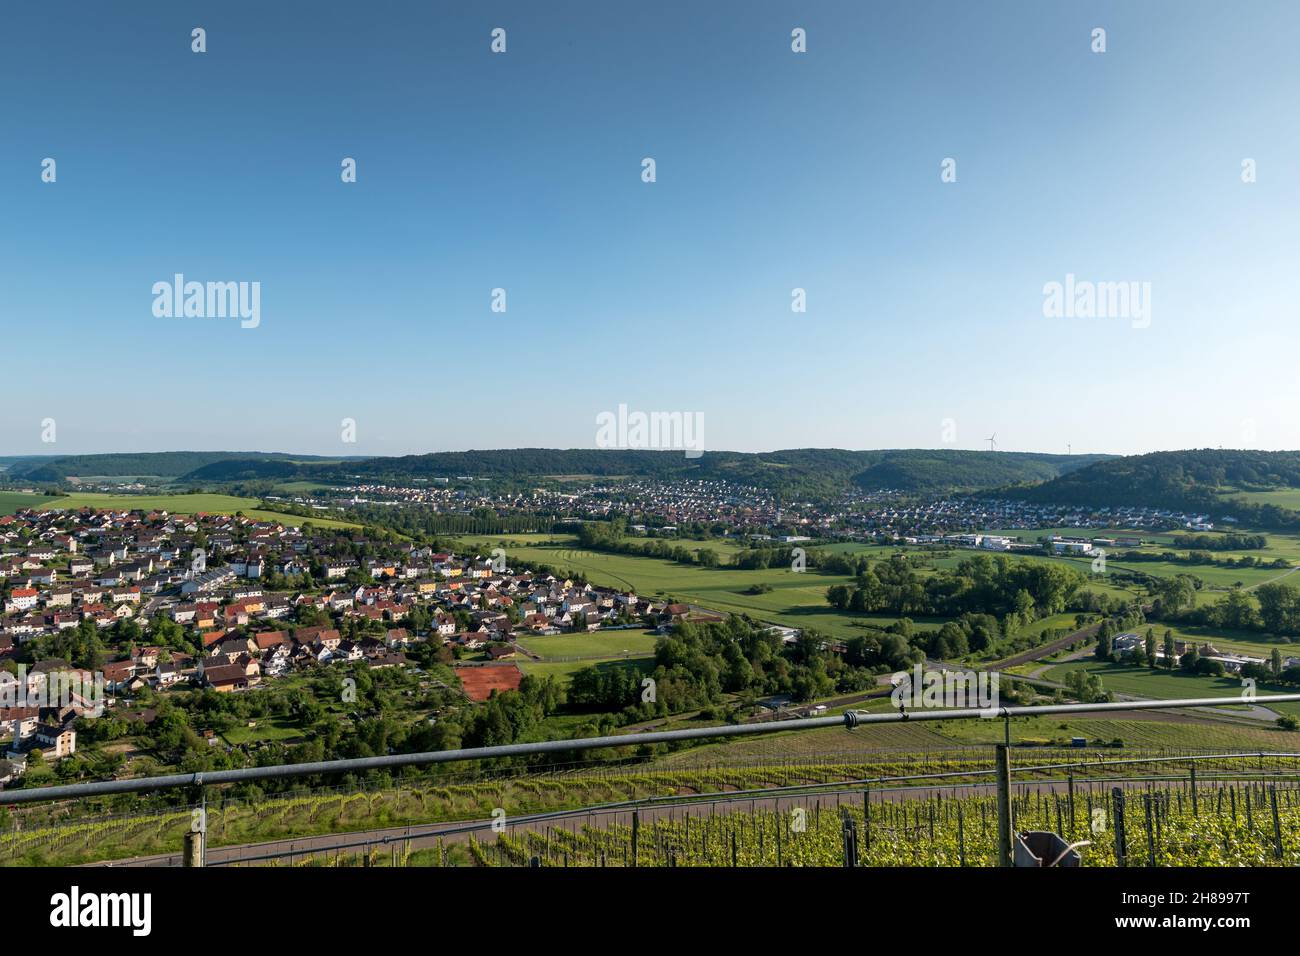 View from the vineyard to the town Gerlachsheim in the valley from the river Tauber in Germany. Stock Photo